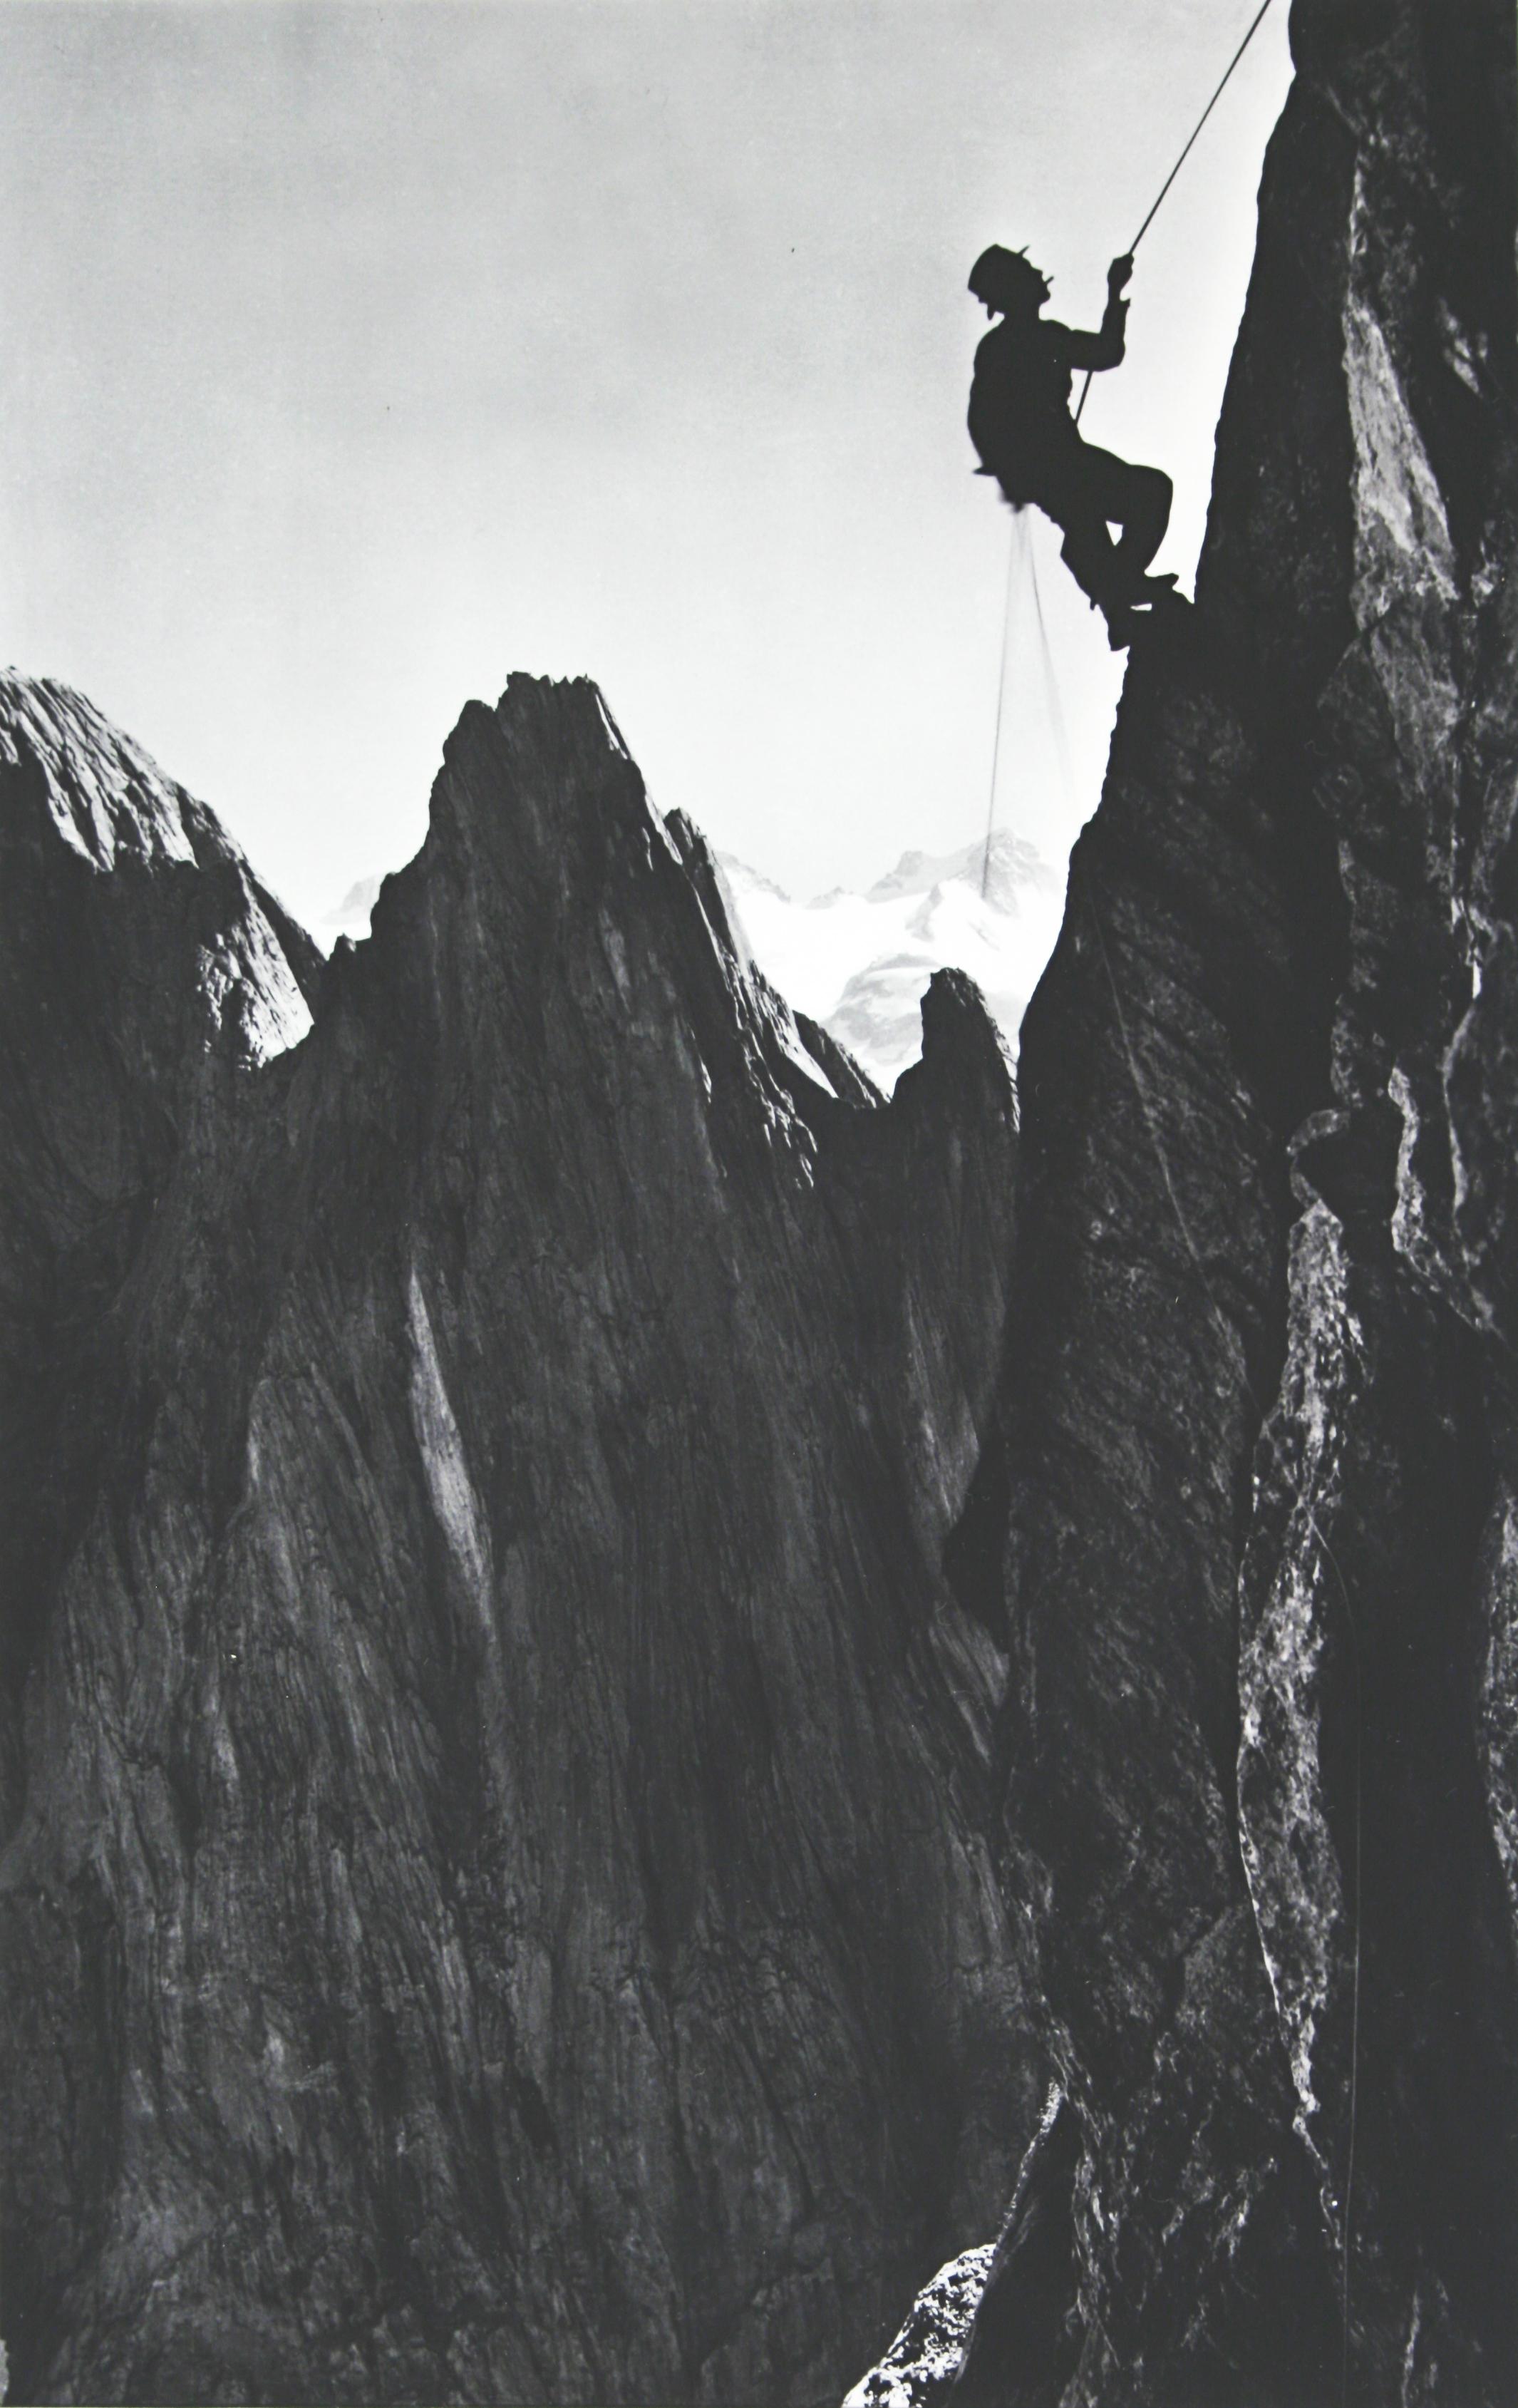 Vintage Alpine Mountaineering photograph.
'CLIMBER' Simelistock, Switzerland, a new mounted black and white photographic image after an original 1930s mountaineering photograph.

Engelhoerner is the name for a group of limestone mountains that